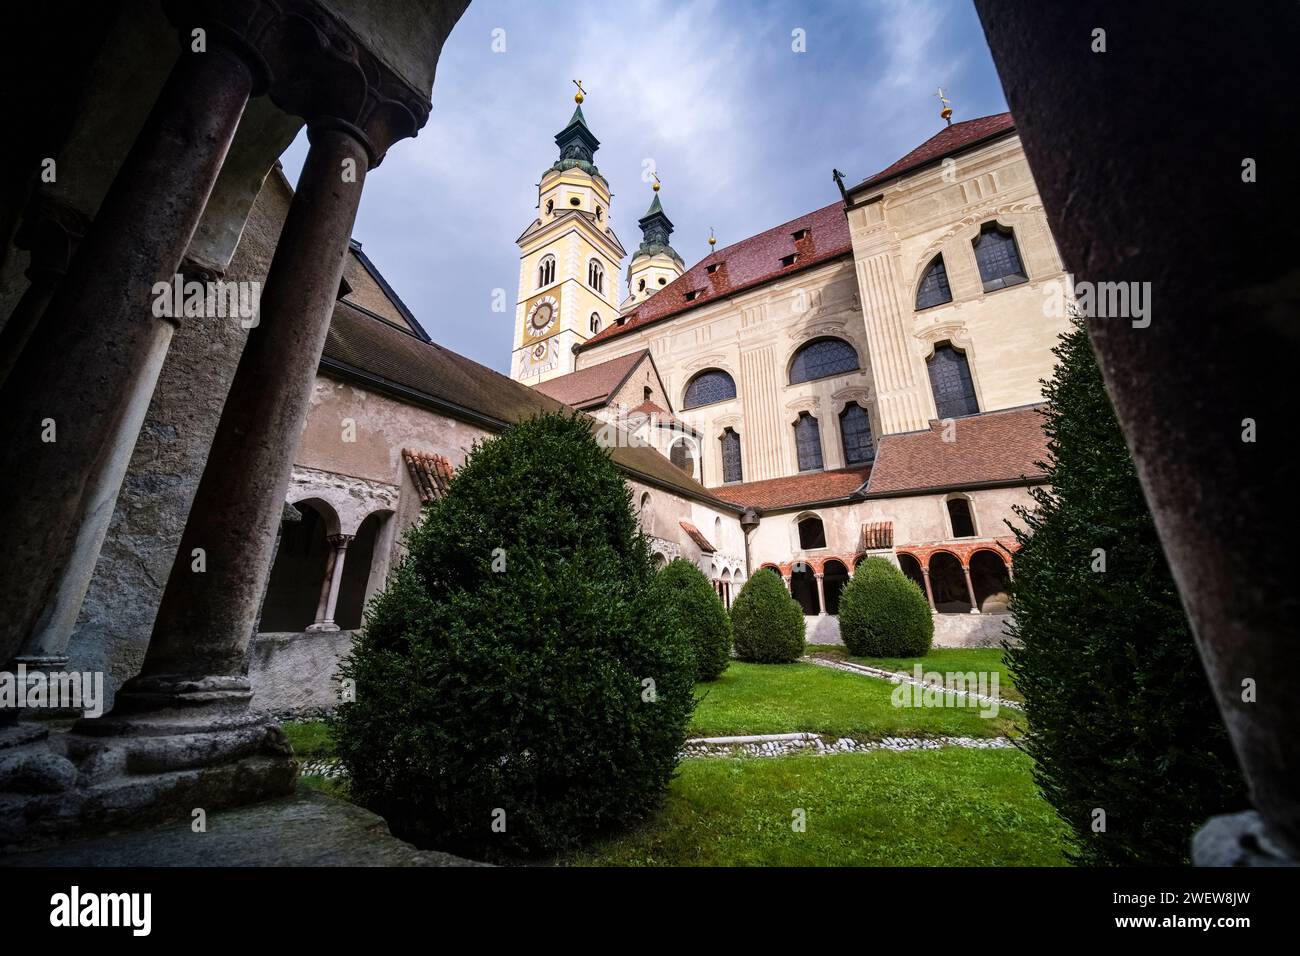 The church Cathedral of Brixen, Duomo di Bressanone, seen from the inner courtyard. Stock Photo